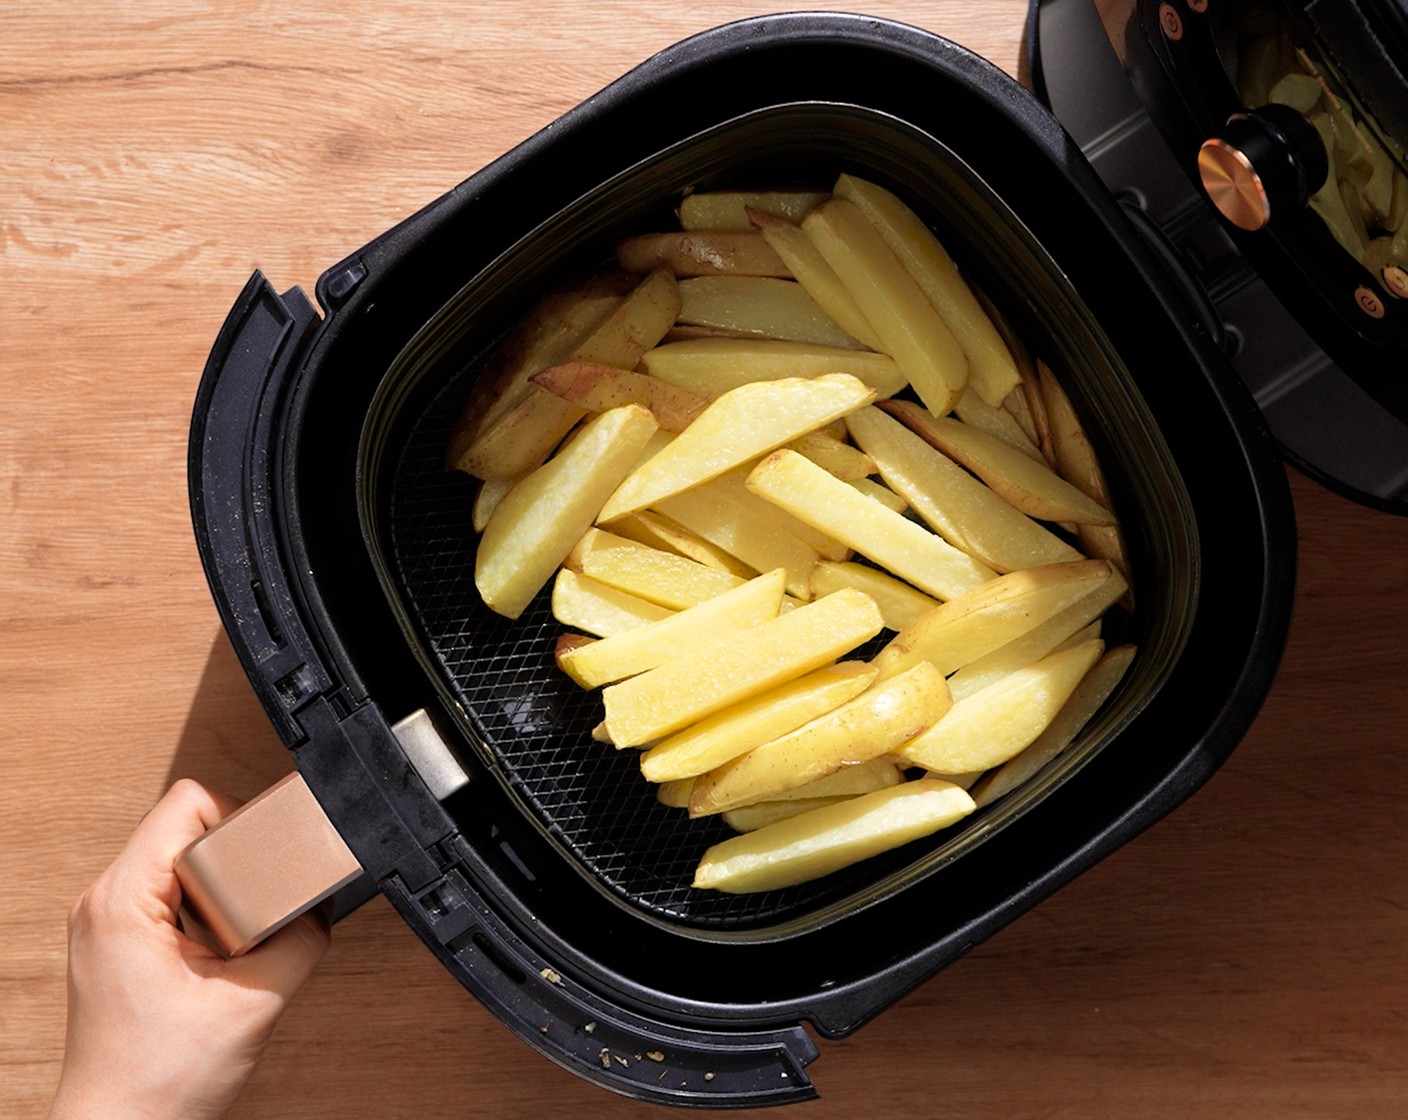 step 5 Place potatoes into an Air-Fryer basket. Air fry at 350 degrees F (180 degrees C) for 12-15 minutes. Give it a shake halfway through.